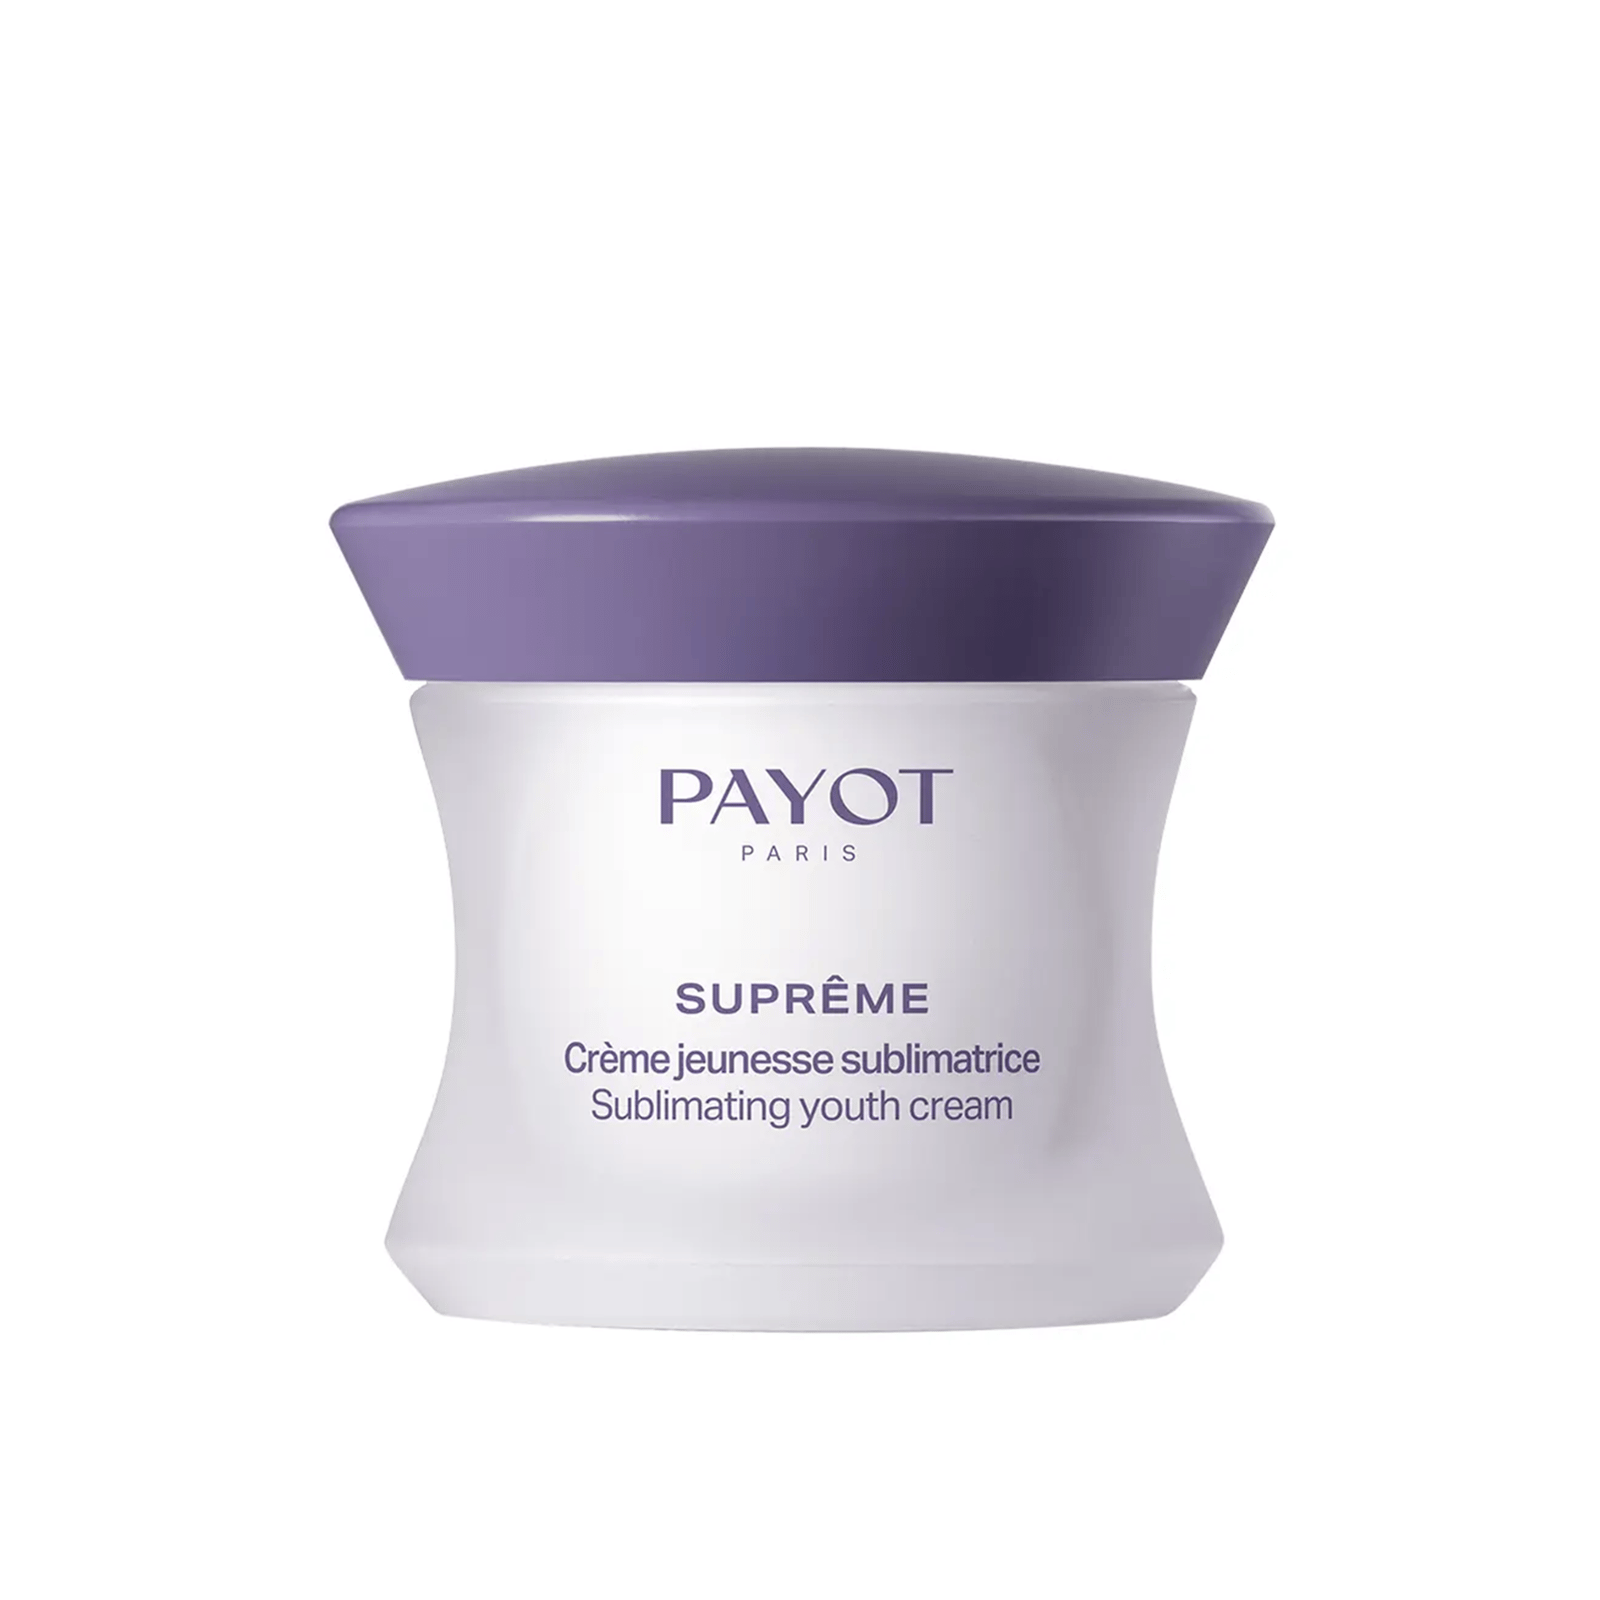 Payot Suprême Sublimating Youth Cream 50ml